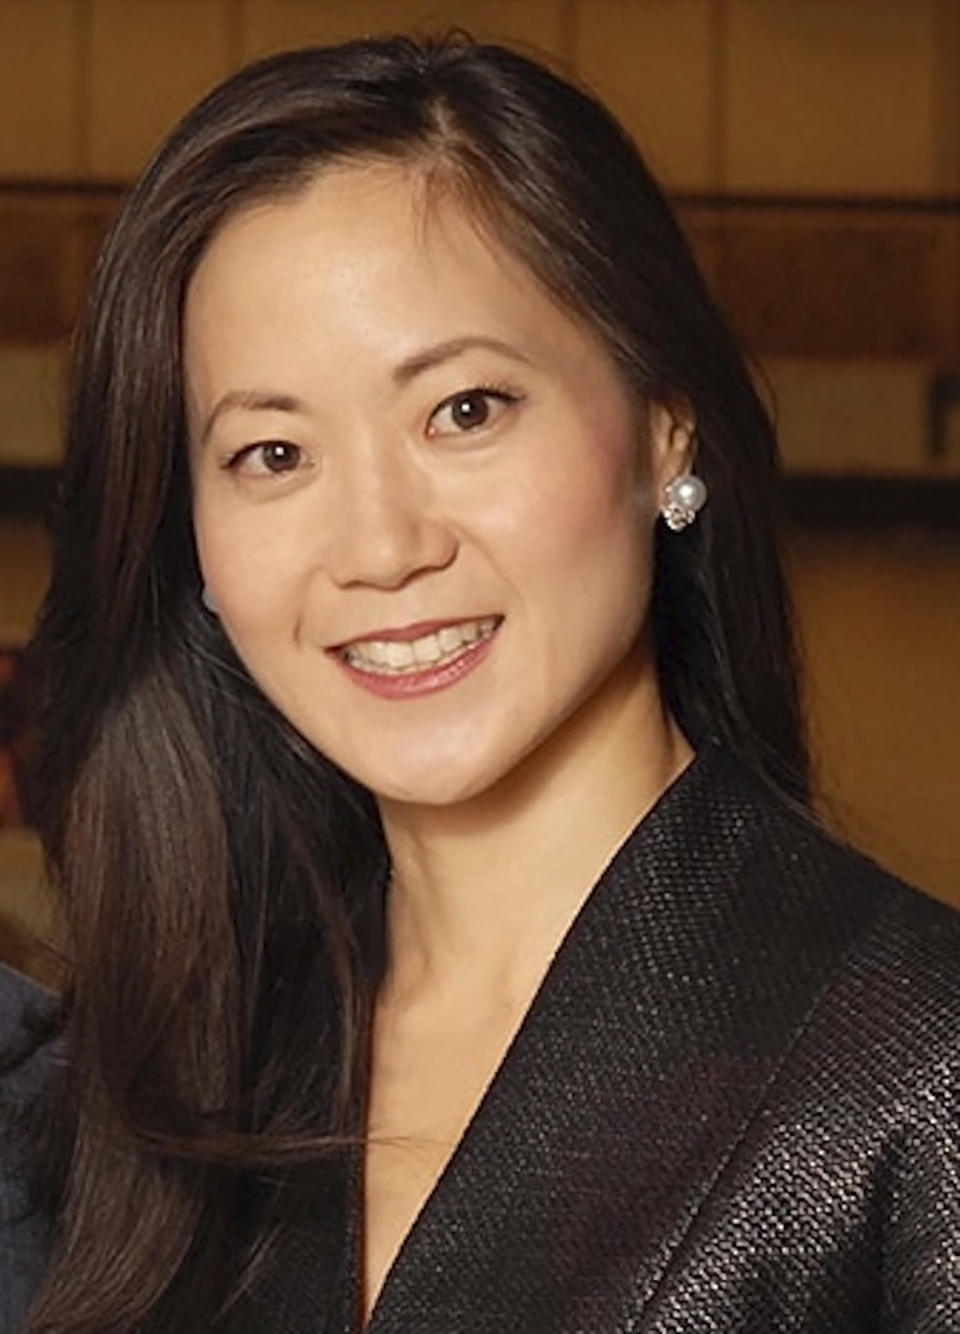 This undated photo provided by Foremost Group shows a portrait of Angela Chao, CEO and chair of her family's shipping business, the Foremost Group, and president of her father's philanthropic organization, the Foremost Foundations. Chao, a sister-in-law of Senate Minority Leader Mitch McConnell, was killed in car accident in Texas, Feb. 11, 2024. The family confirmed Chao's death in a statement. The 50-year-old was part of a prominent, immigrant family with ties to Republican leaders and former presidents. (Courtesy of Foremost Group via AP)